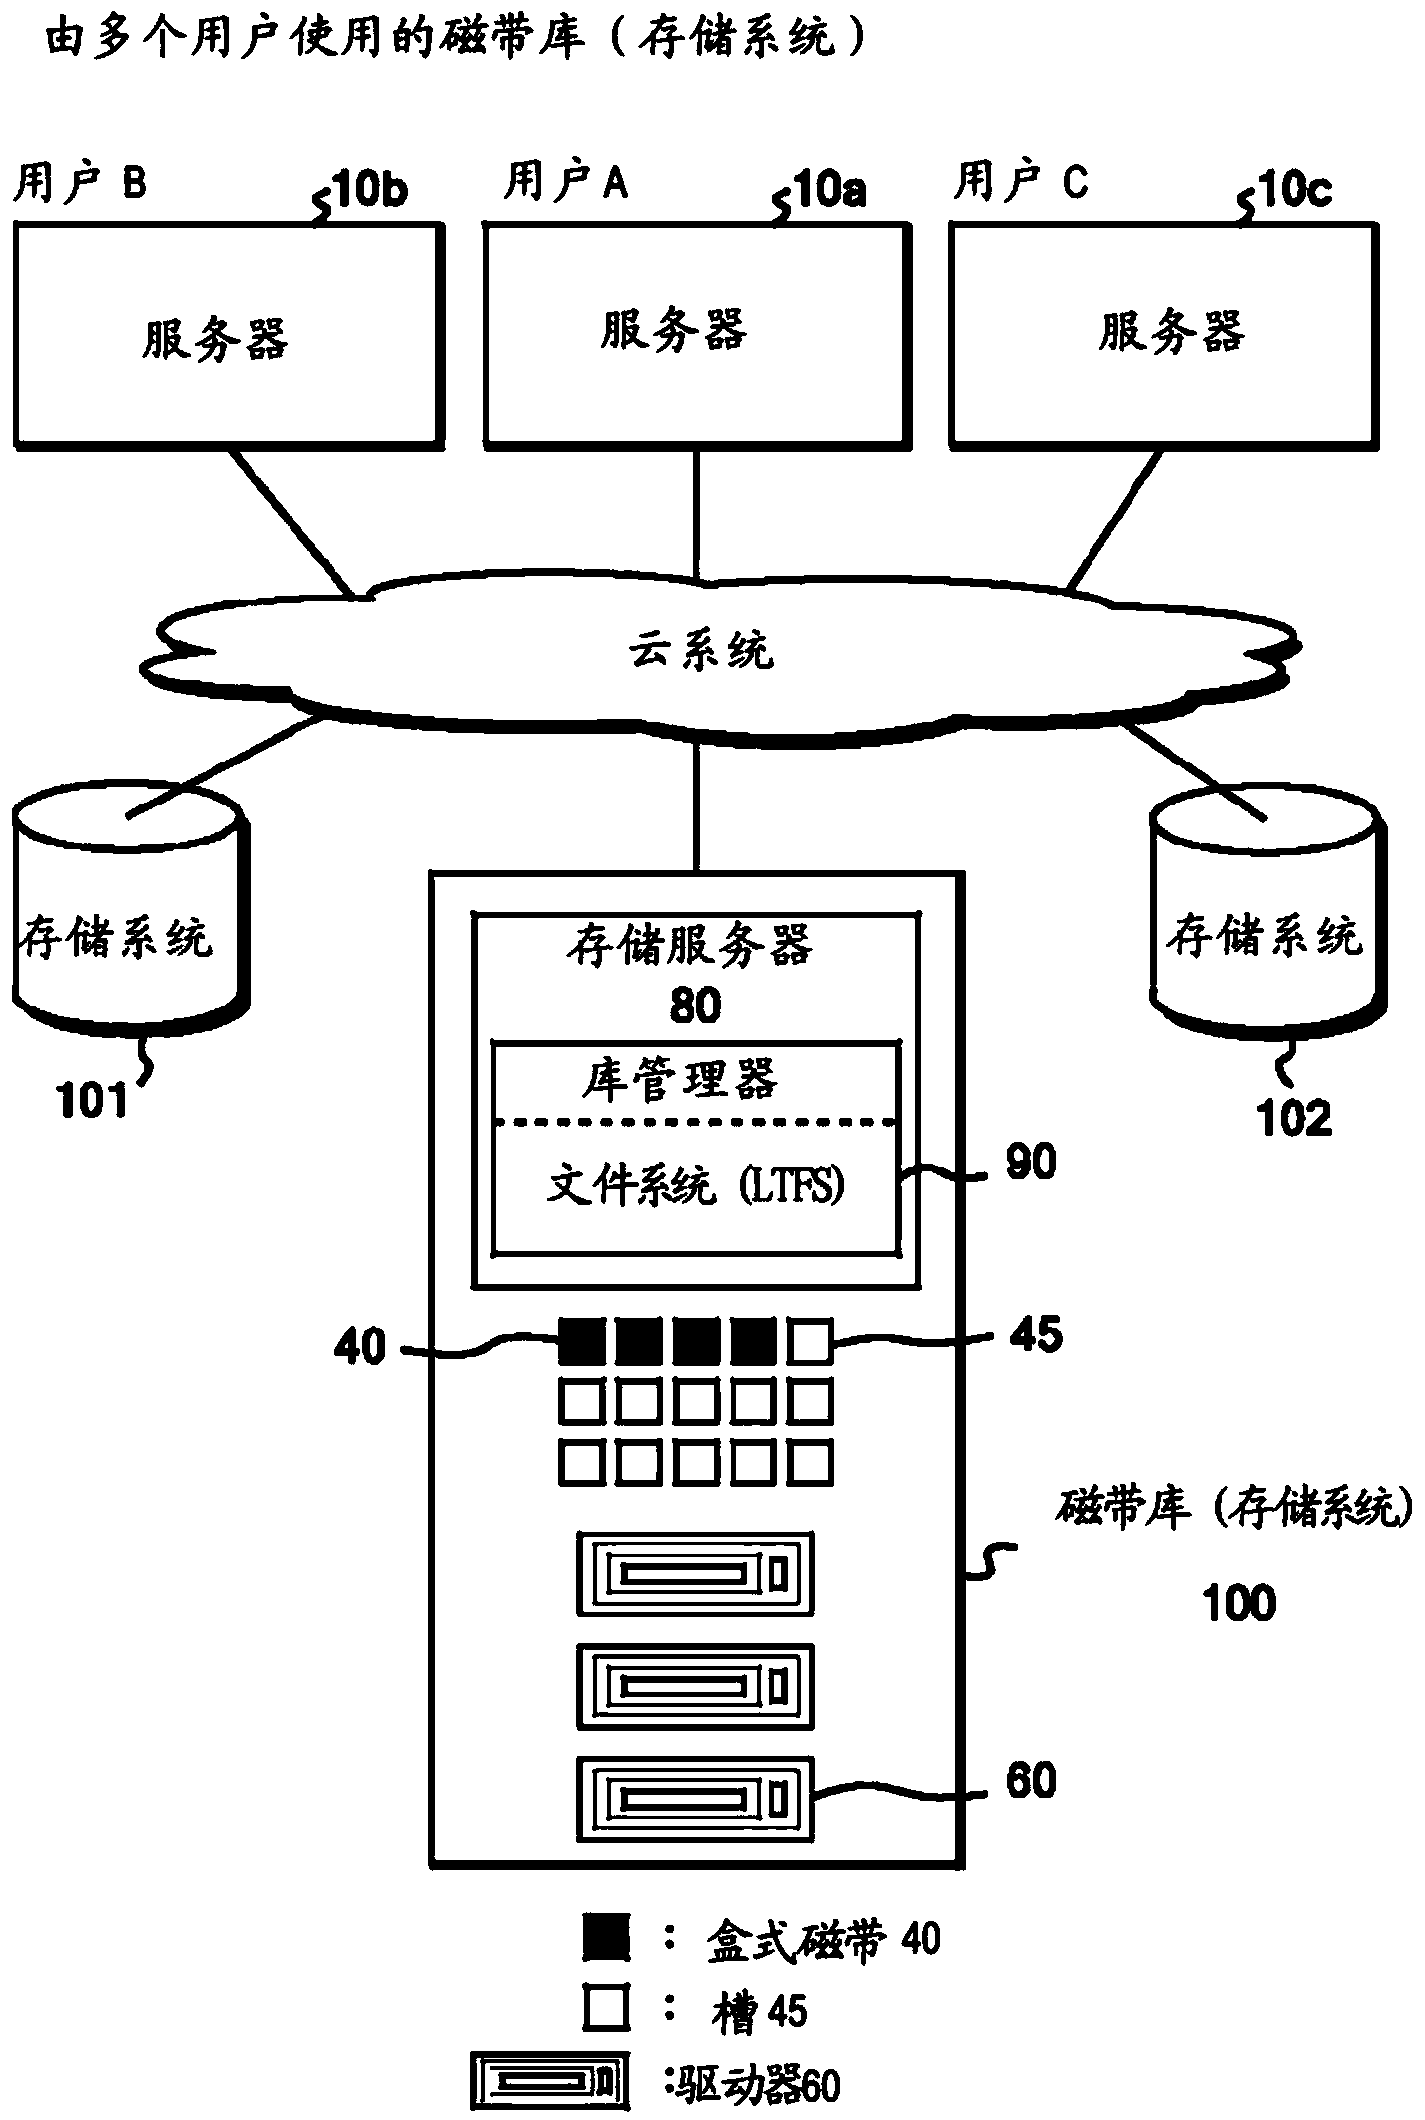 Method for divisionally managing files on a user basis, and a storage system thereof